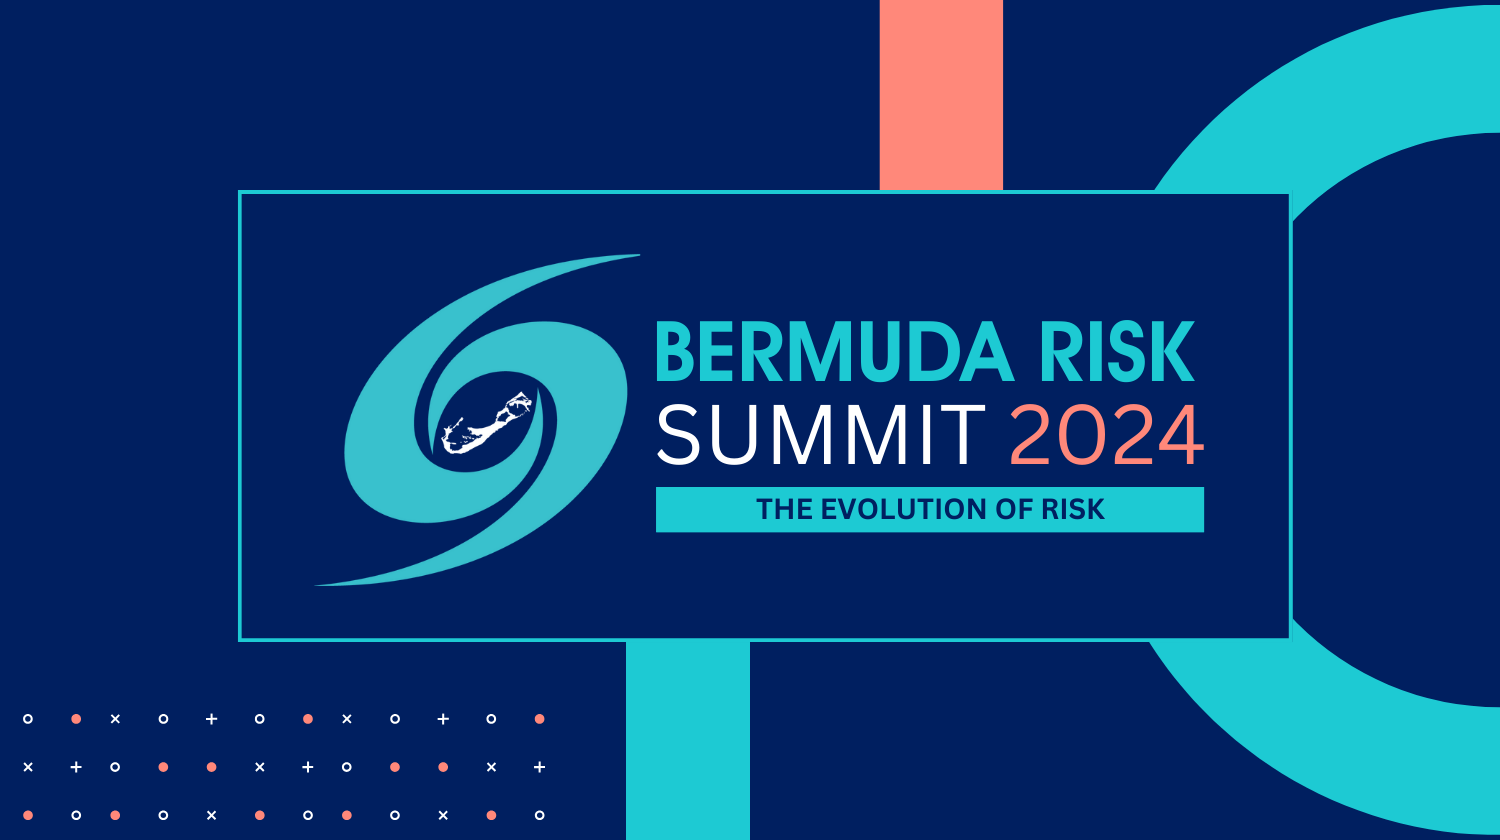 Evolution of Risk is Theme of 2024 Bermuda Risk Summit